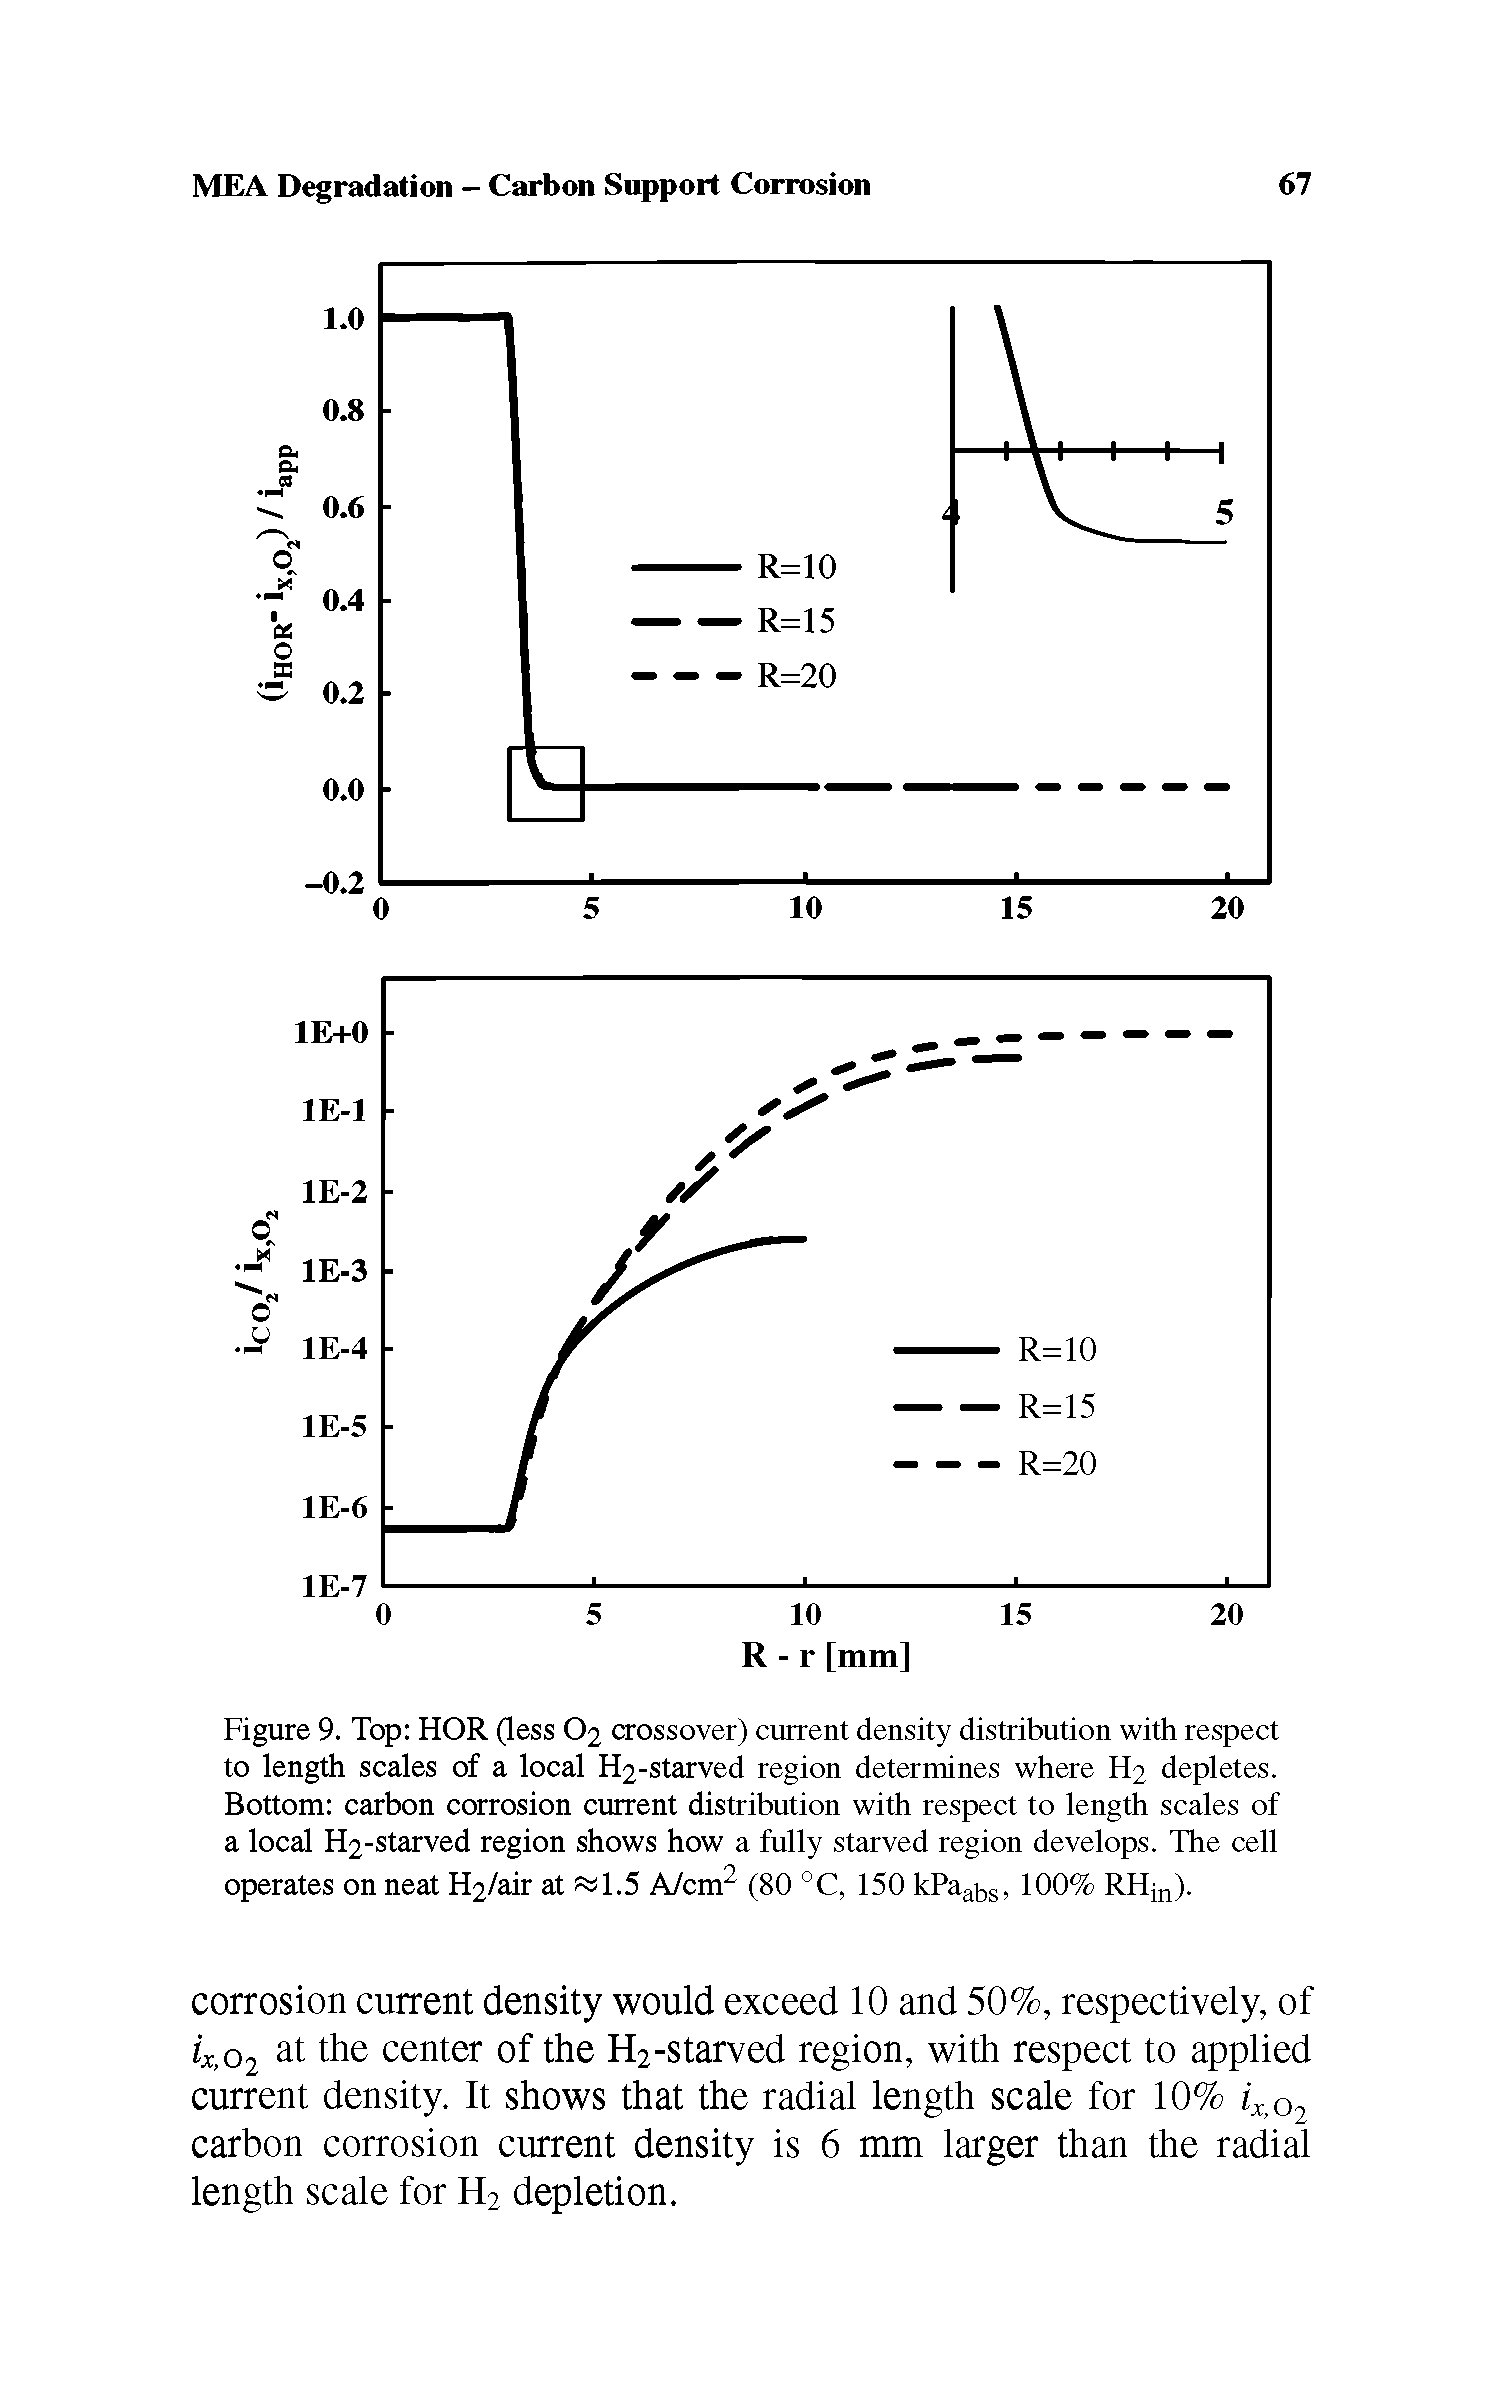 Figure 9. Top HOR (less O2 crossover) current density distribution with respect to length scales of a local H2-starved region determines where H2 depletes. Bottom carbon corrosion current distribution with respect to length scales of a local H2-starved region shows how a fully starved region develops. The cell operates on neat H2/air at s 1.5 A/cm2 (80 °C, 150 kPaabs, 100% RHin).